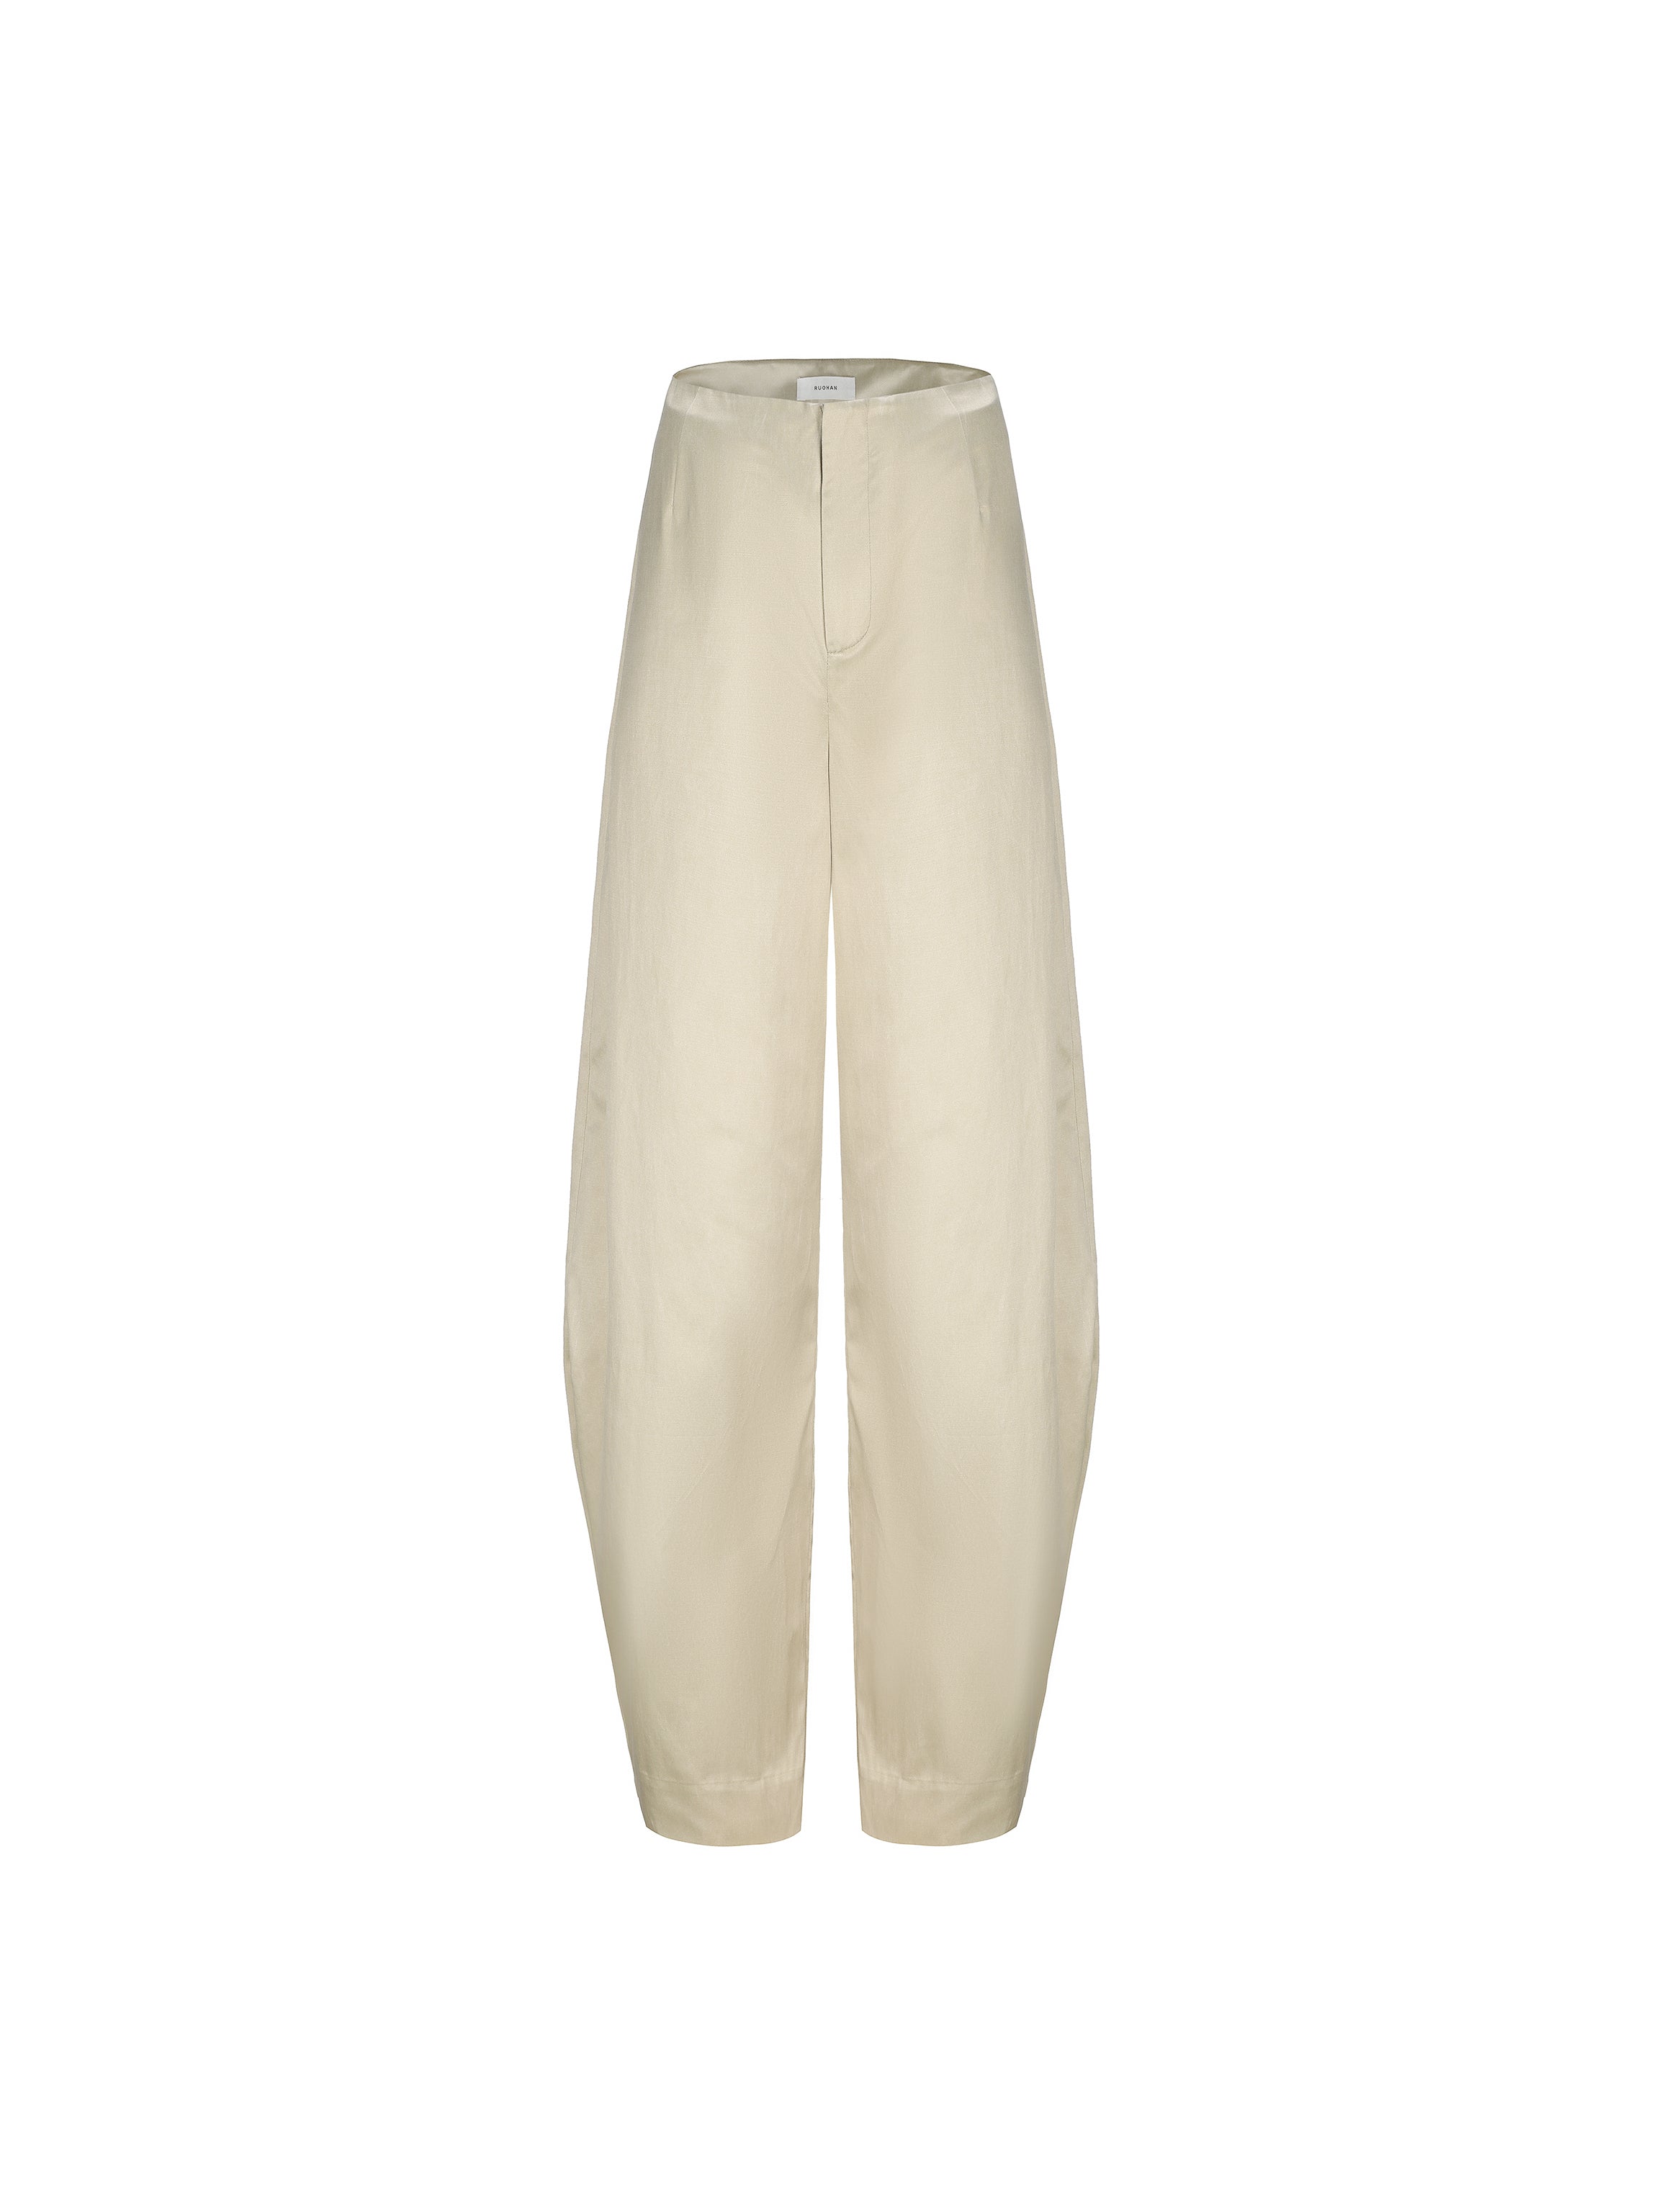 SS24 - WATER CACOON PANTS